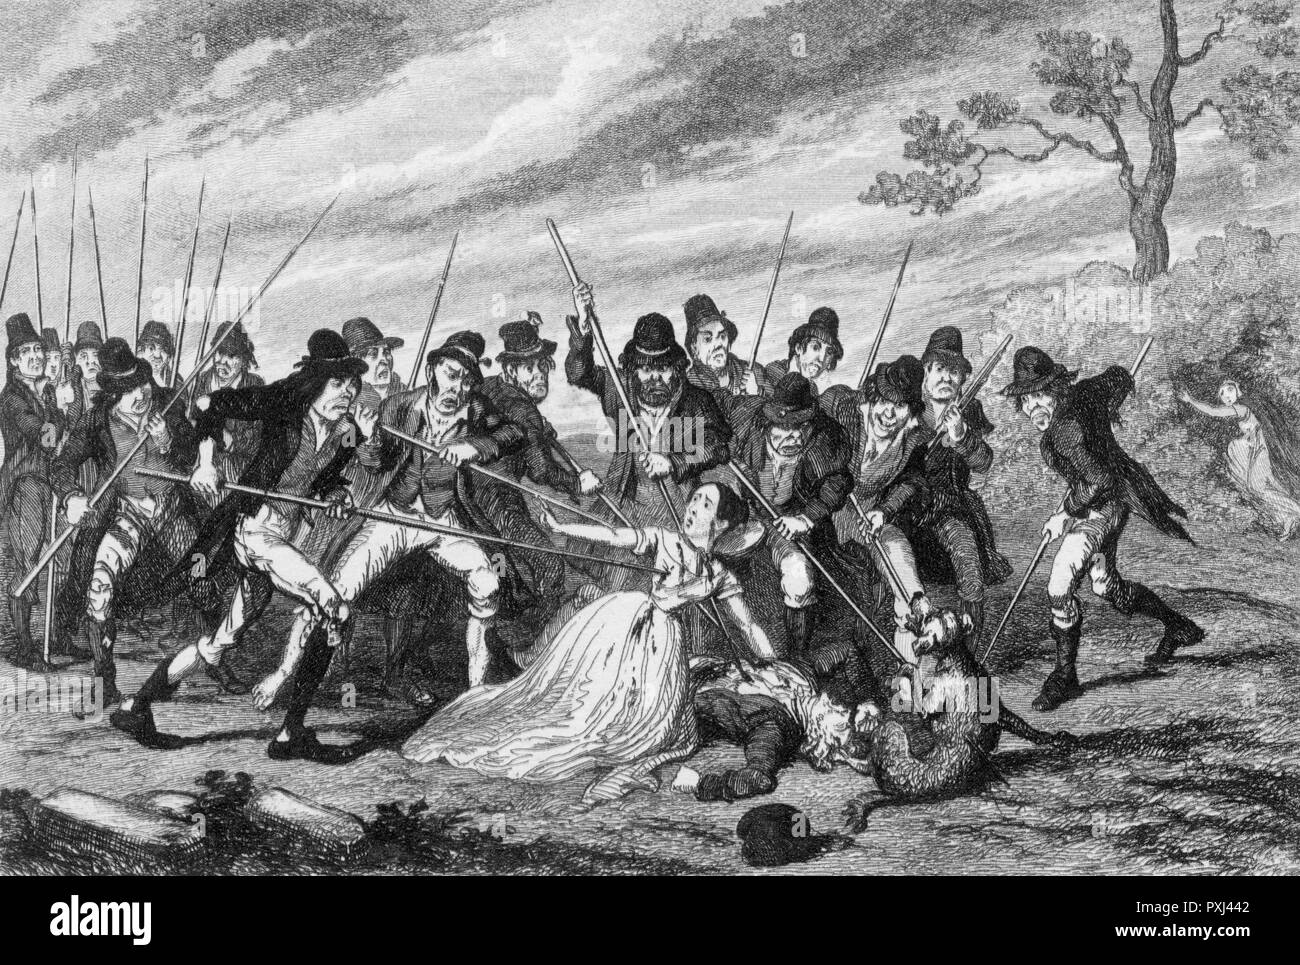 'Murder of George Crawford and his Grandaughter': Irish rebels with spears kill pair and their dog, witness hides in bushes (slightly blurred original)     Date: May 1798 Stock Photo